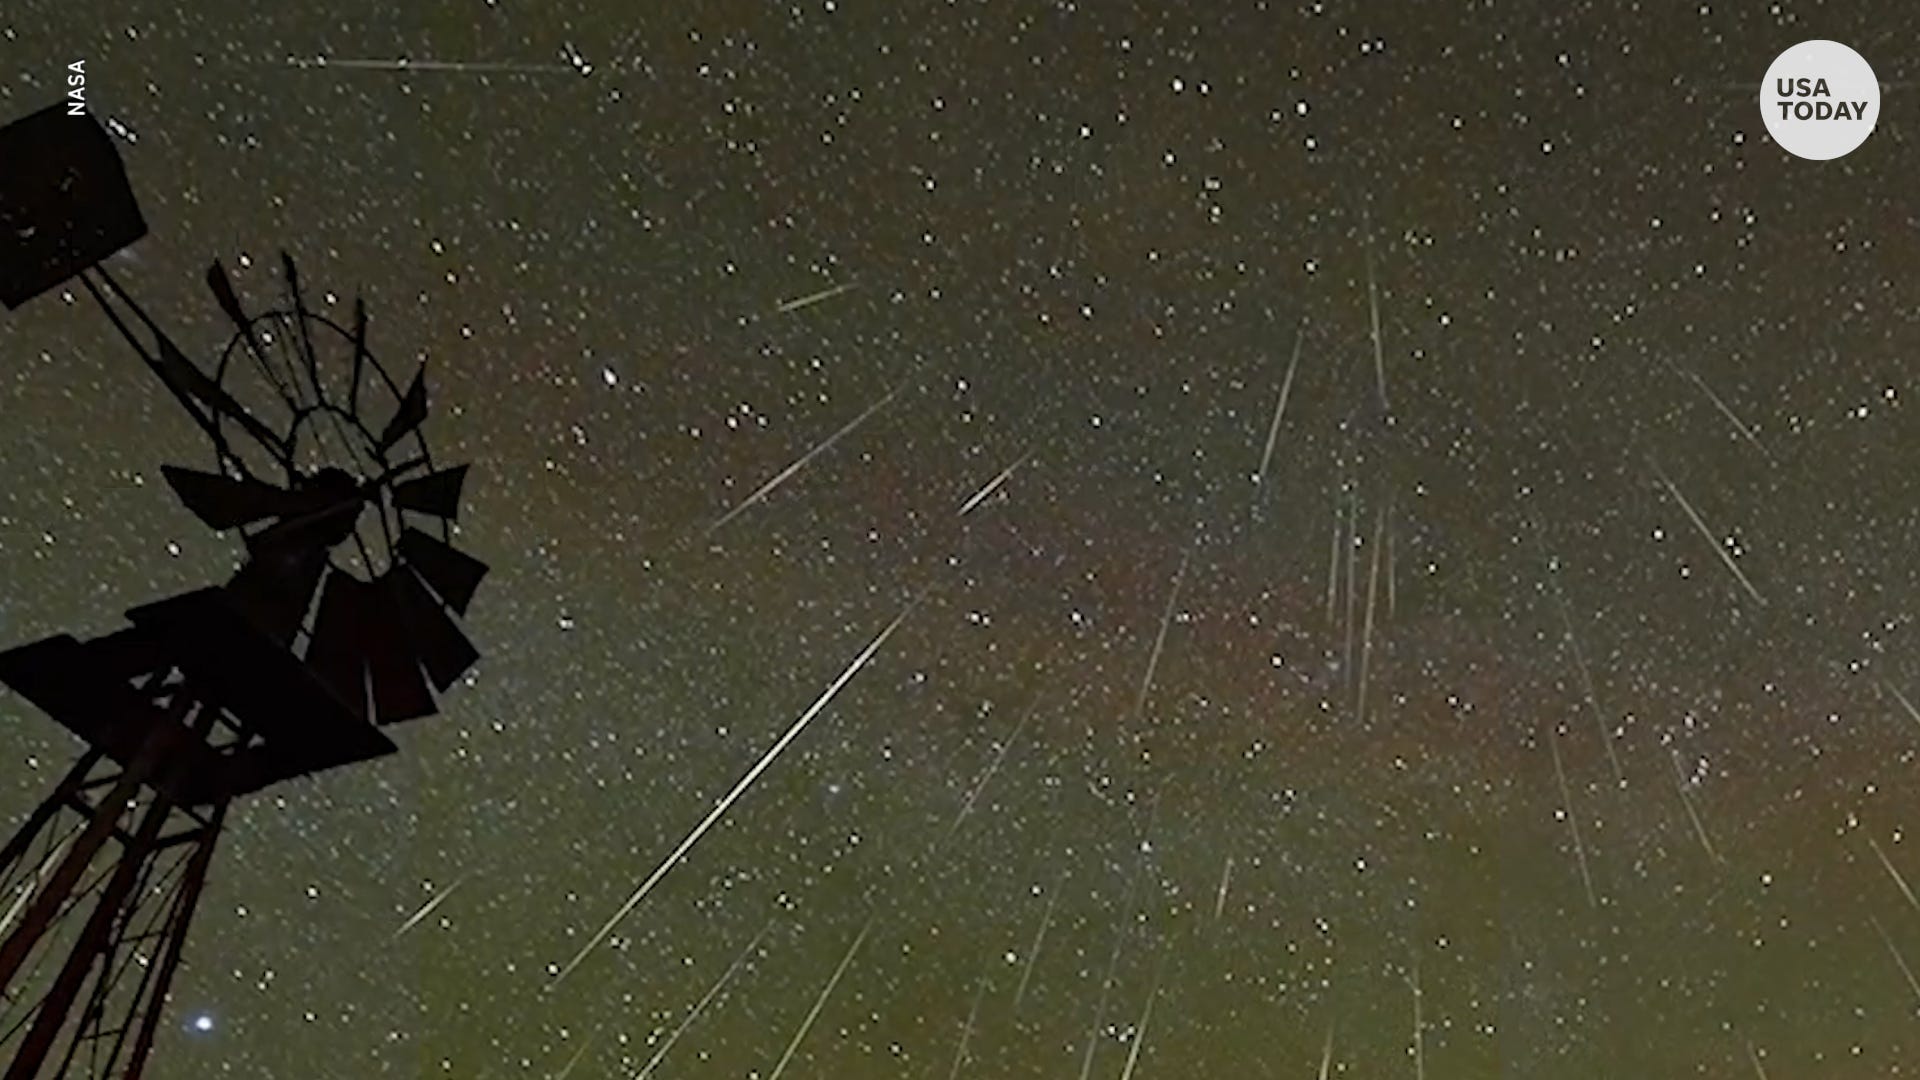 Geminid meteor shower, one of the year's best to watch